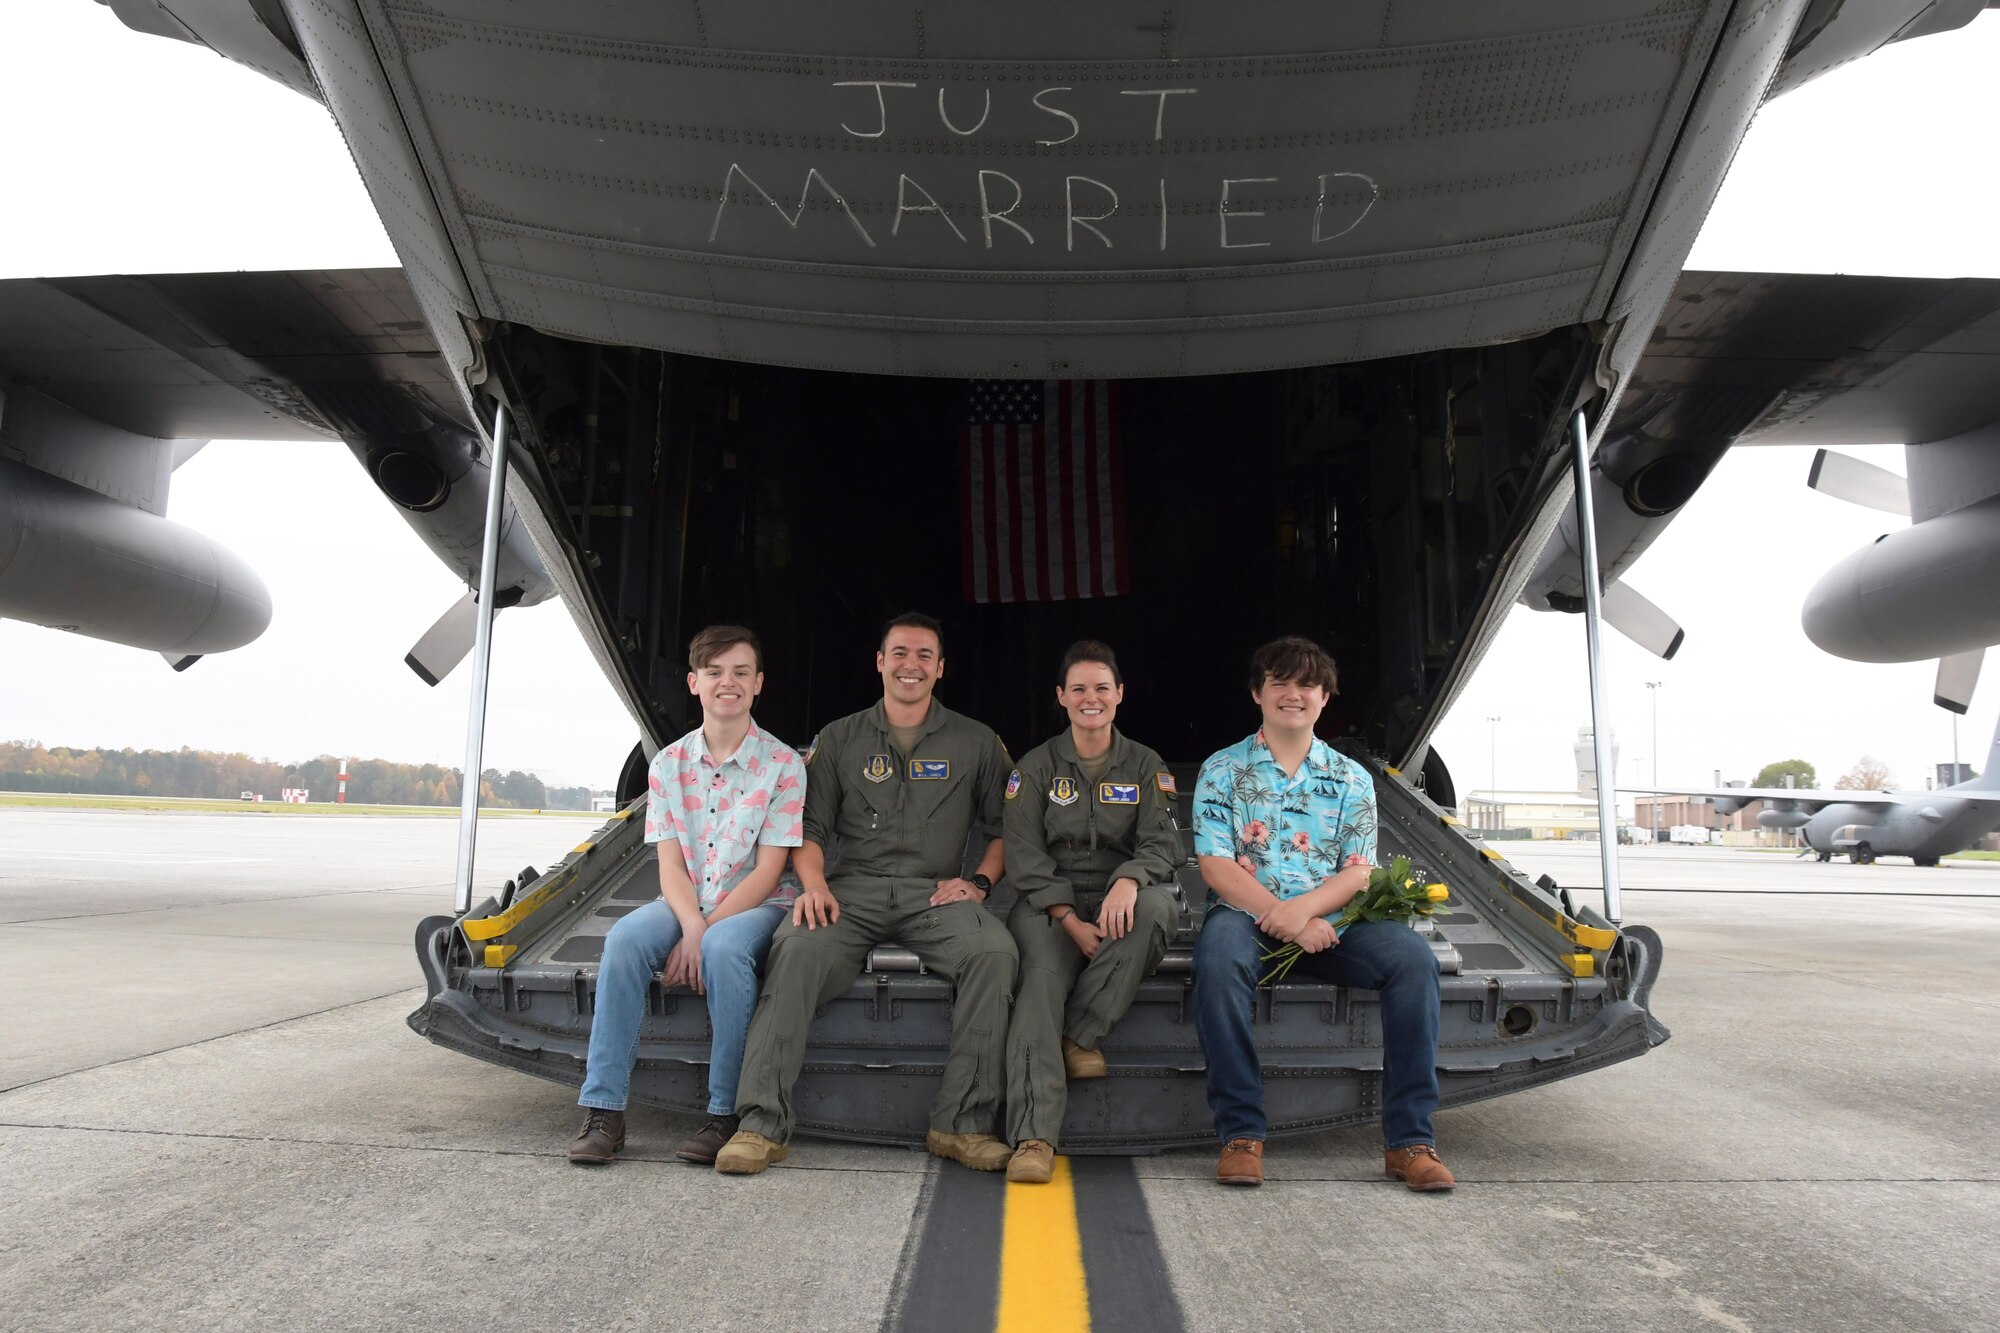 Capt. Will Jones, 700th Airlift Squadron pilot, and 1st Lt. Lyndsy Harrison, a 700th AS navigator, pose for a photo with Harrison's two sons shortly after a wedding ceremony held on the back of a C-130H3 Hercules at Dobbins Air Reserve Base, Ga. on Nov. 10, 2020. The couple came up with the idea to get married on the back of a C-130 to honor their love of aviation. (U.S. Air Force photo/Andrew Park)